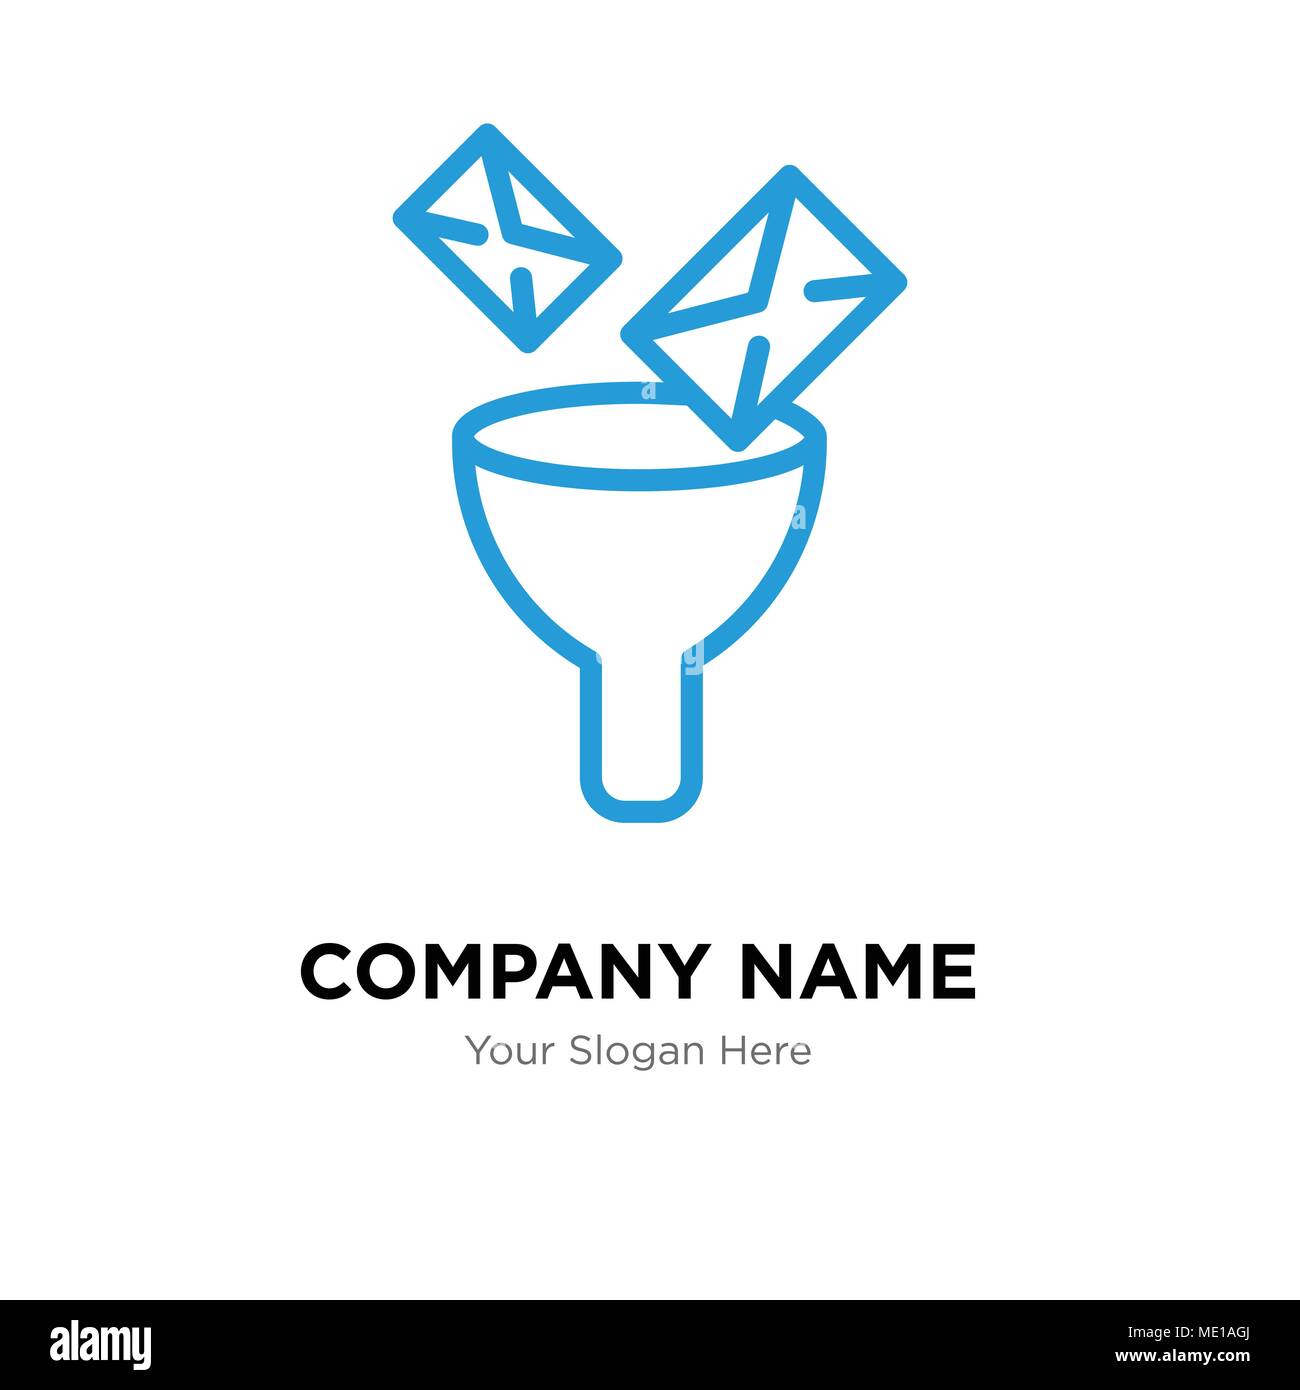 Mail Funneling company logo design template, Business corporate vector icon Stock Vector